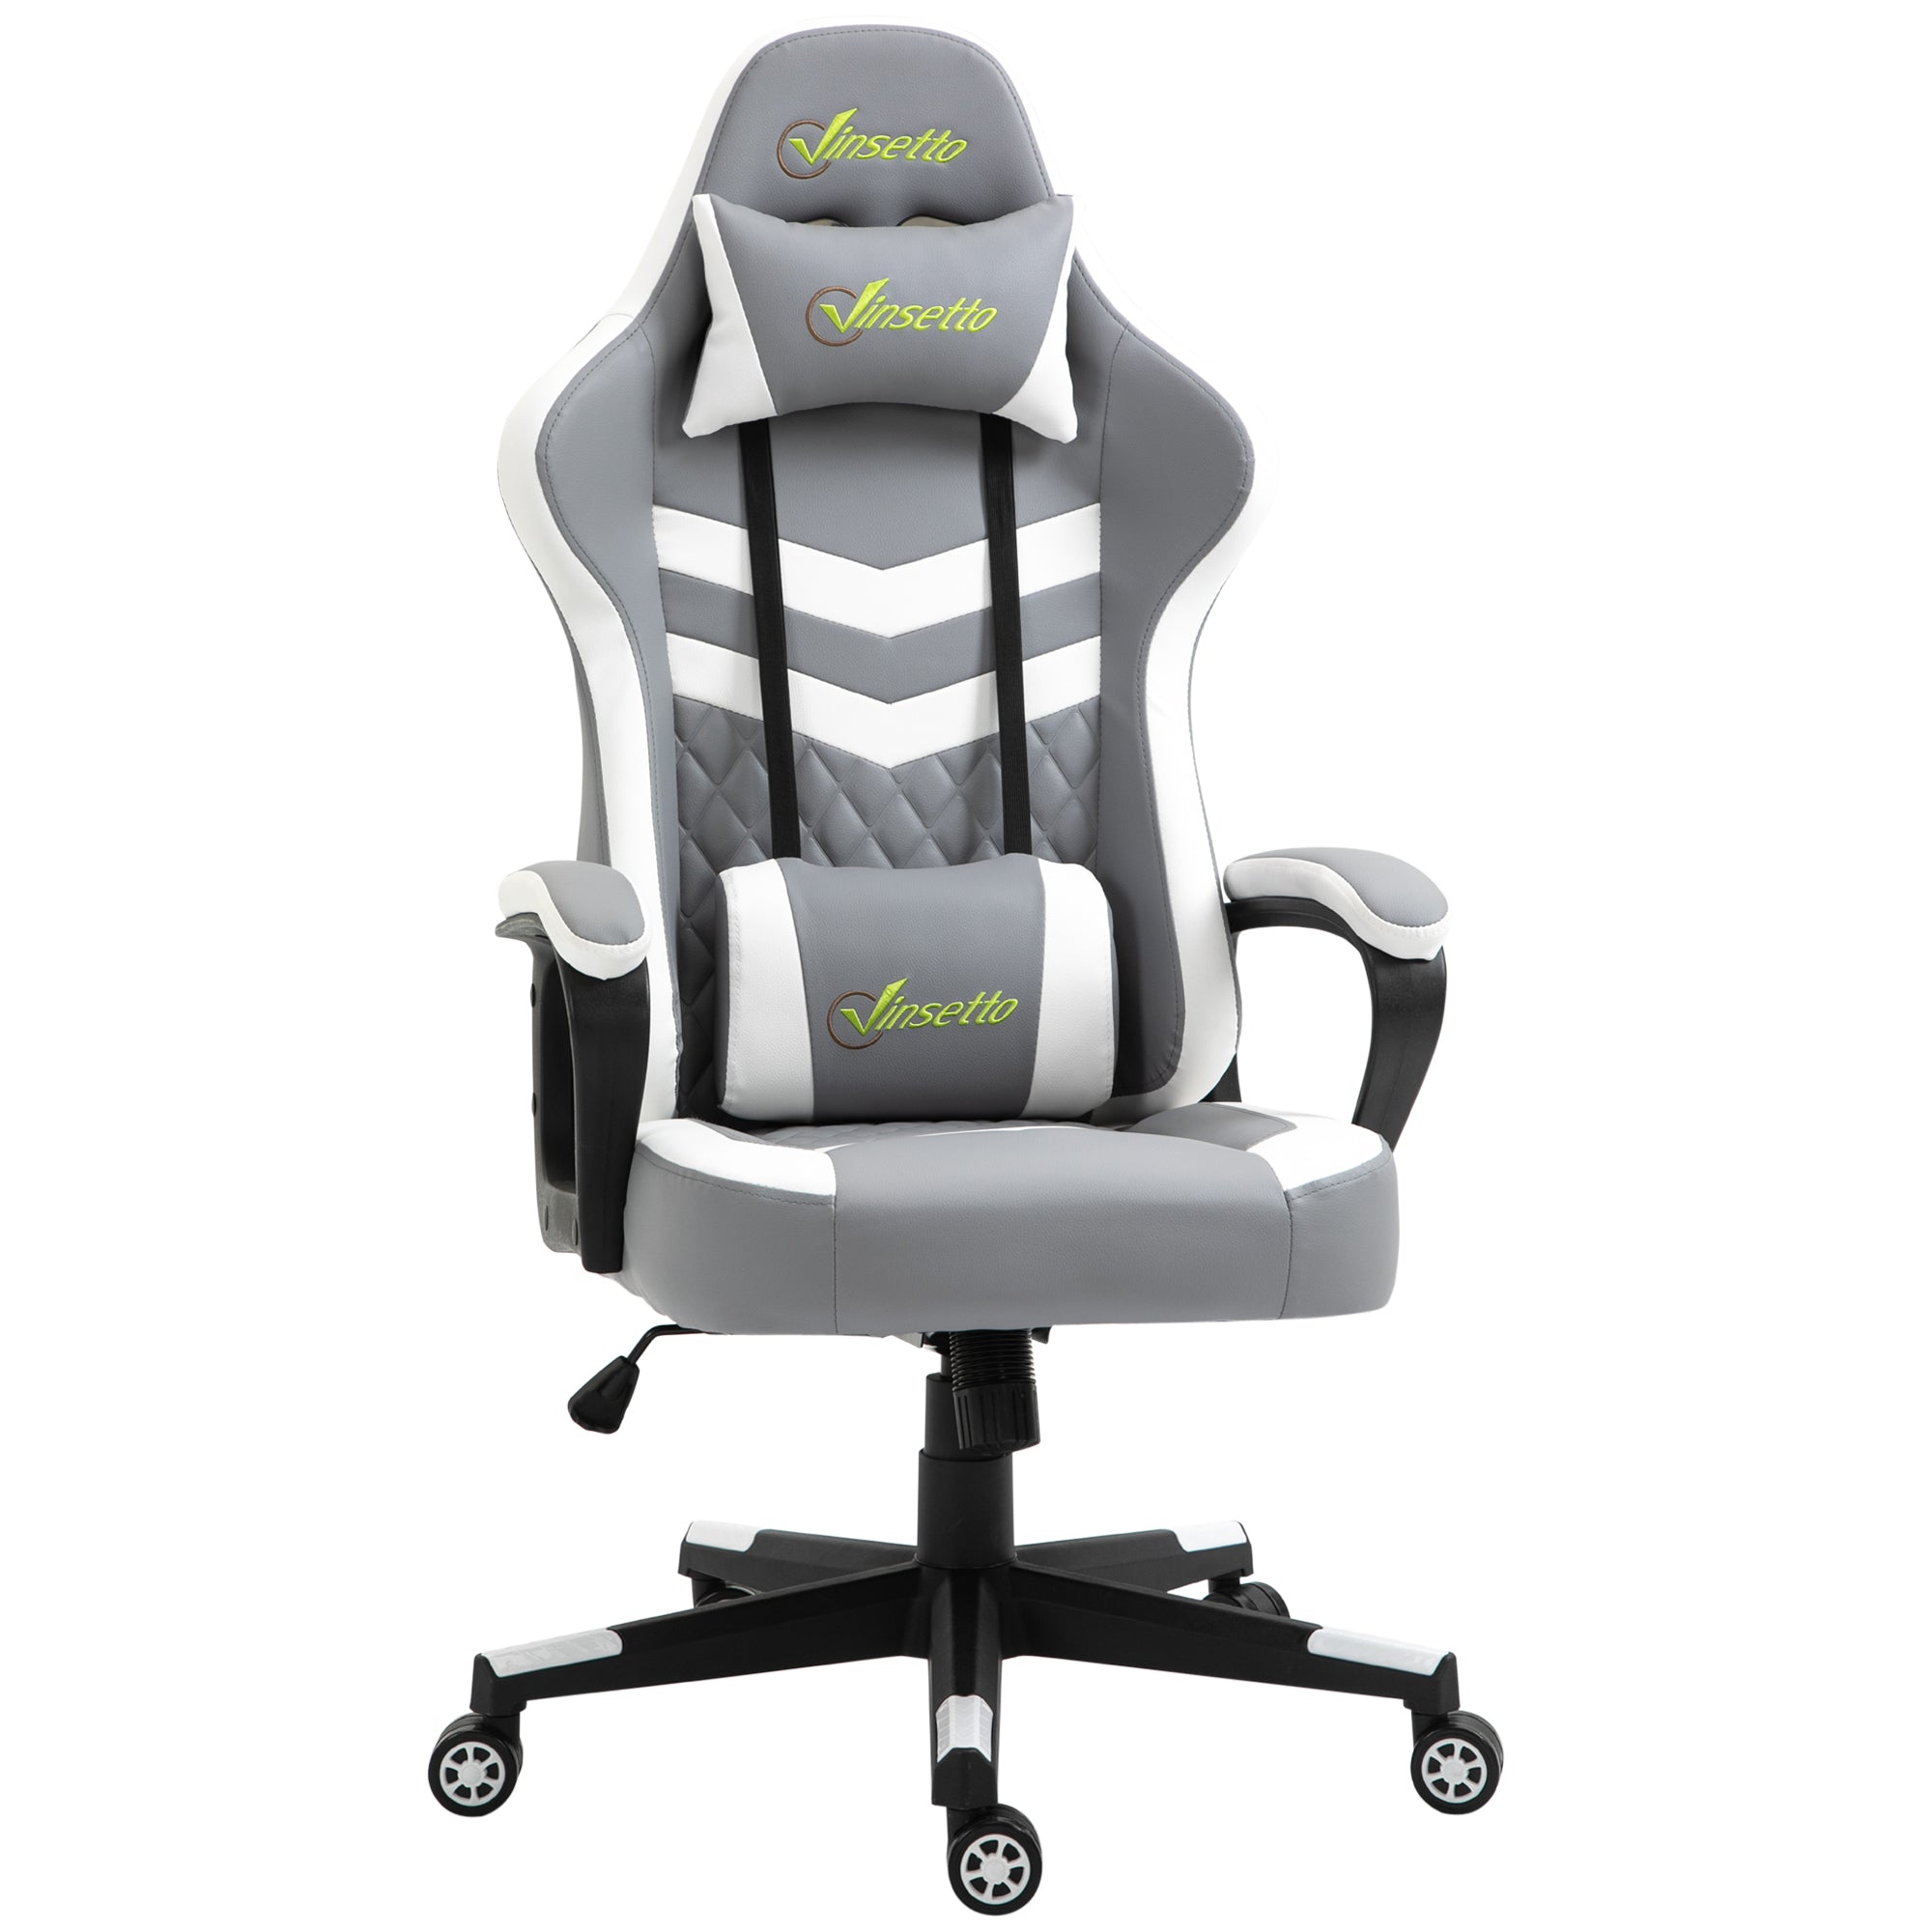 Vinsetto Racing Gaming Chair w/ Lumbar Support - Gamer Office Chair - Grey White  | TJ Hughes